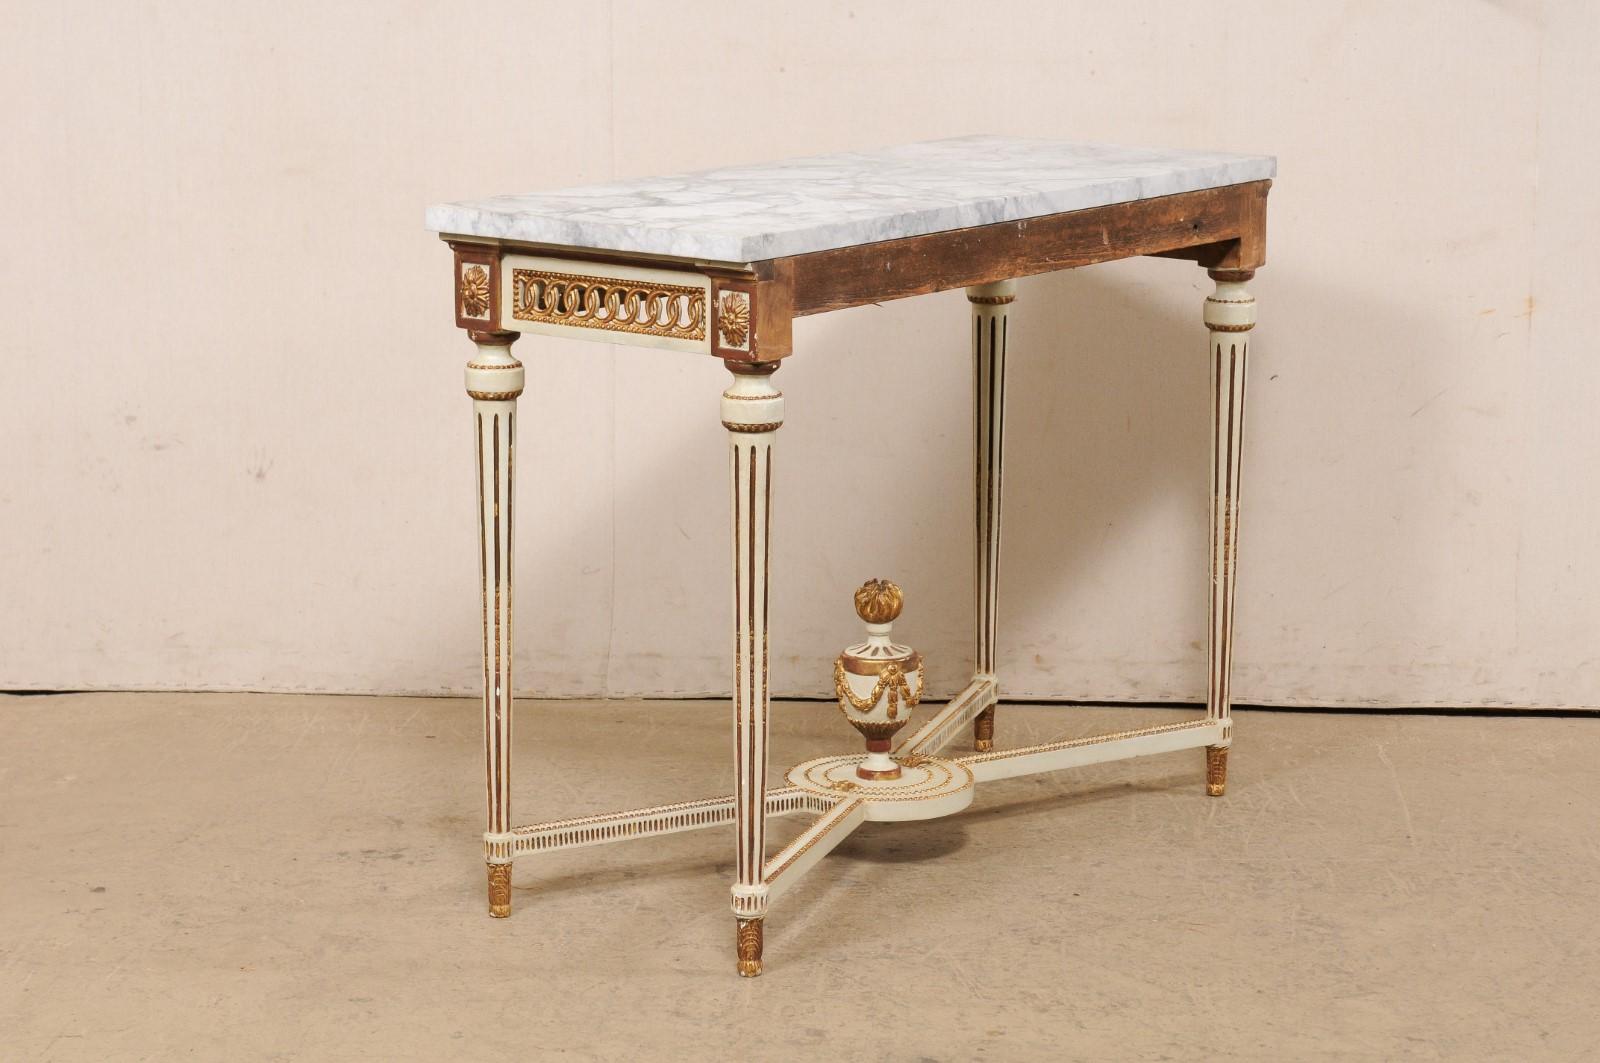 Italian Marble Top Console w/Pierce-Carved Apron & Large Urn Finial at Underside For Sale 4